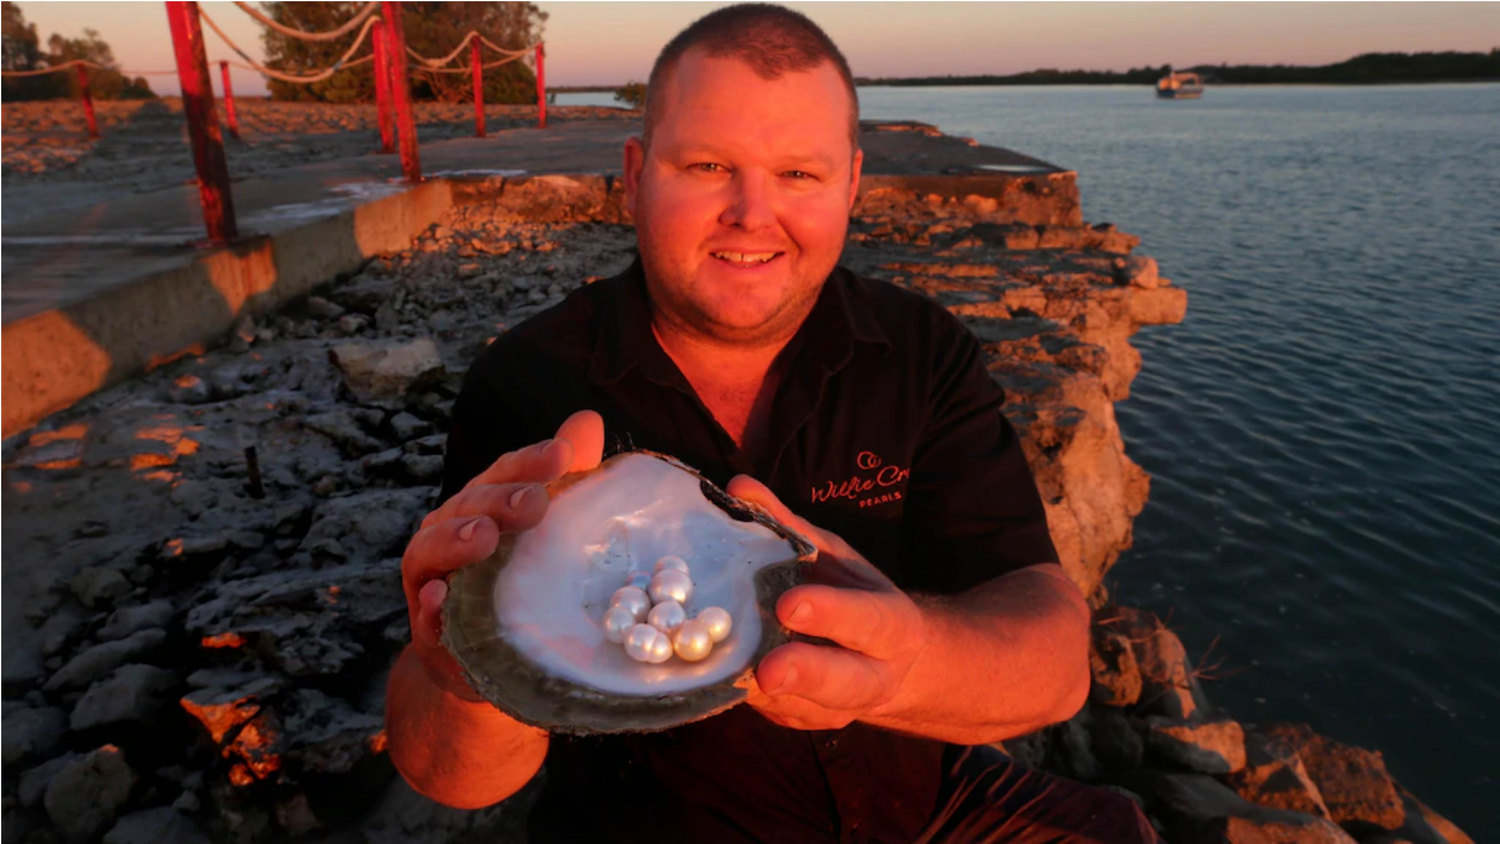 Willie Creek Pearls and Autore Pearls on mission to find WA’s perfect pearl